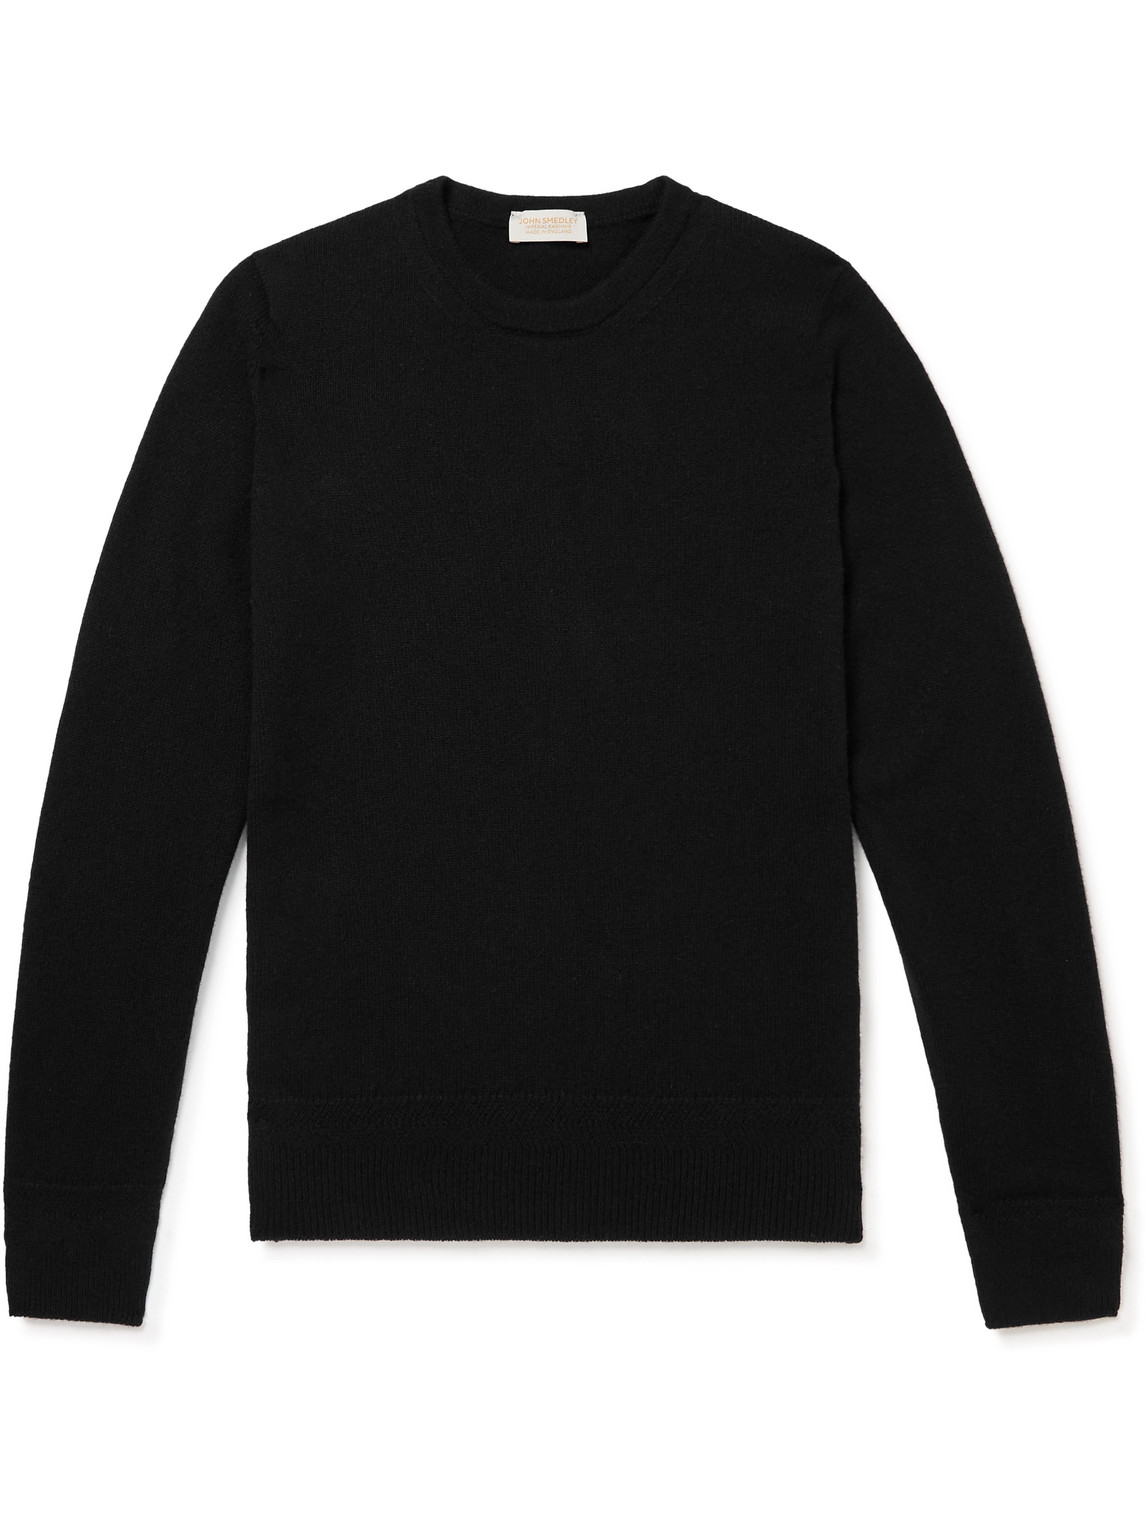 JOHN SMEDLEY NIKO SLIM-FIT RECYCLED CASHMERE AND MERINO WOOL-BLEND SWEATER